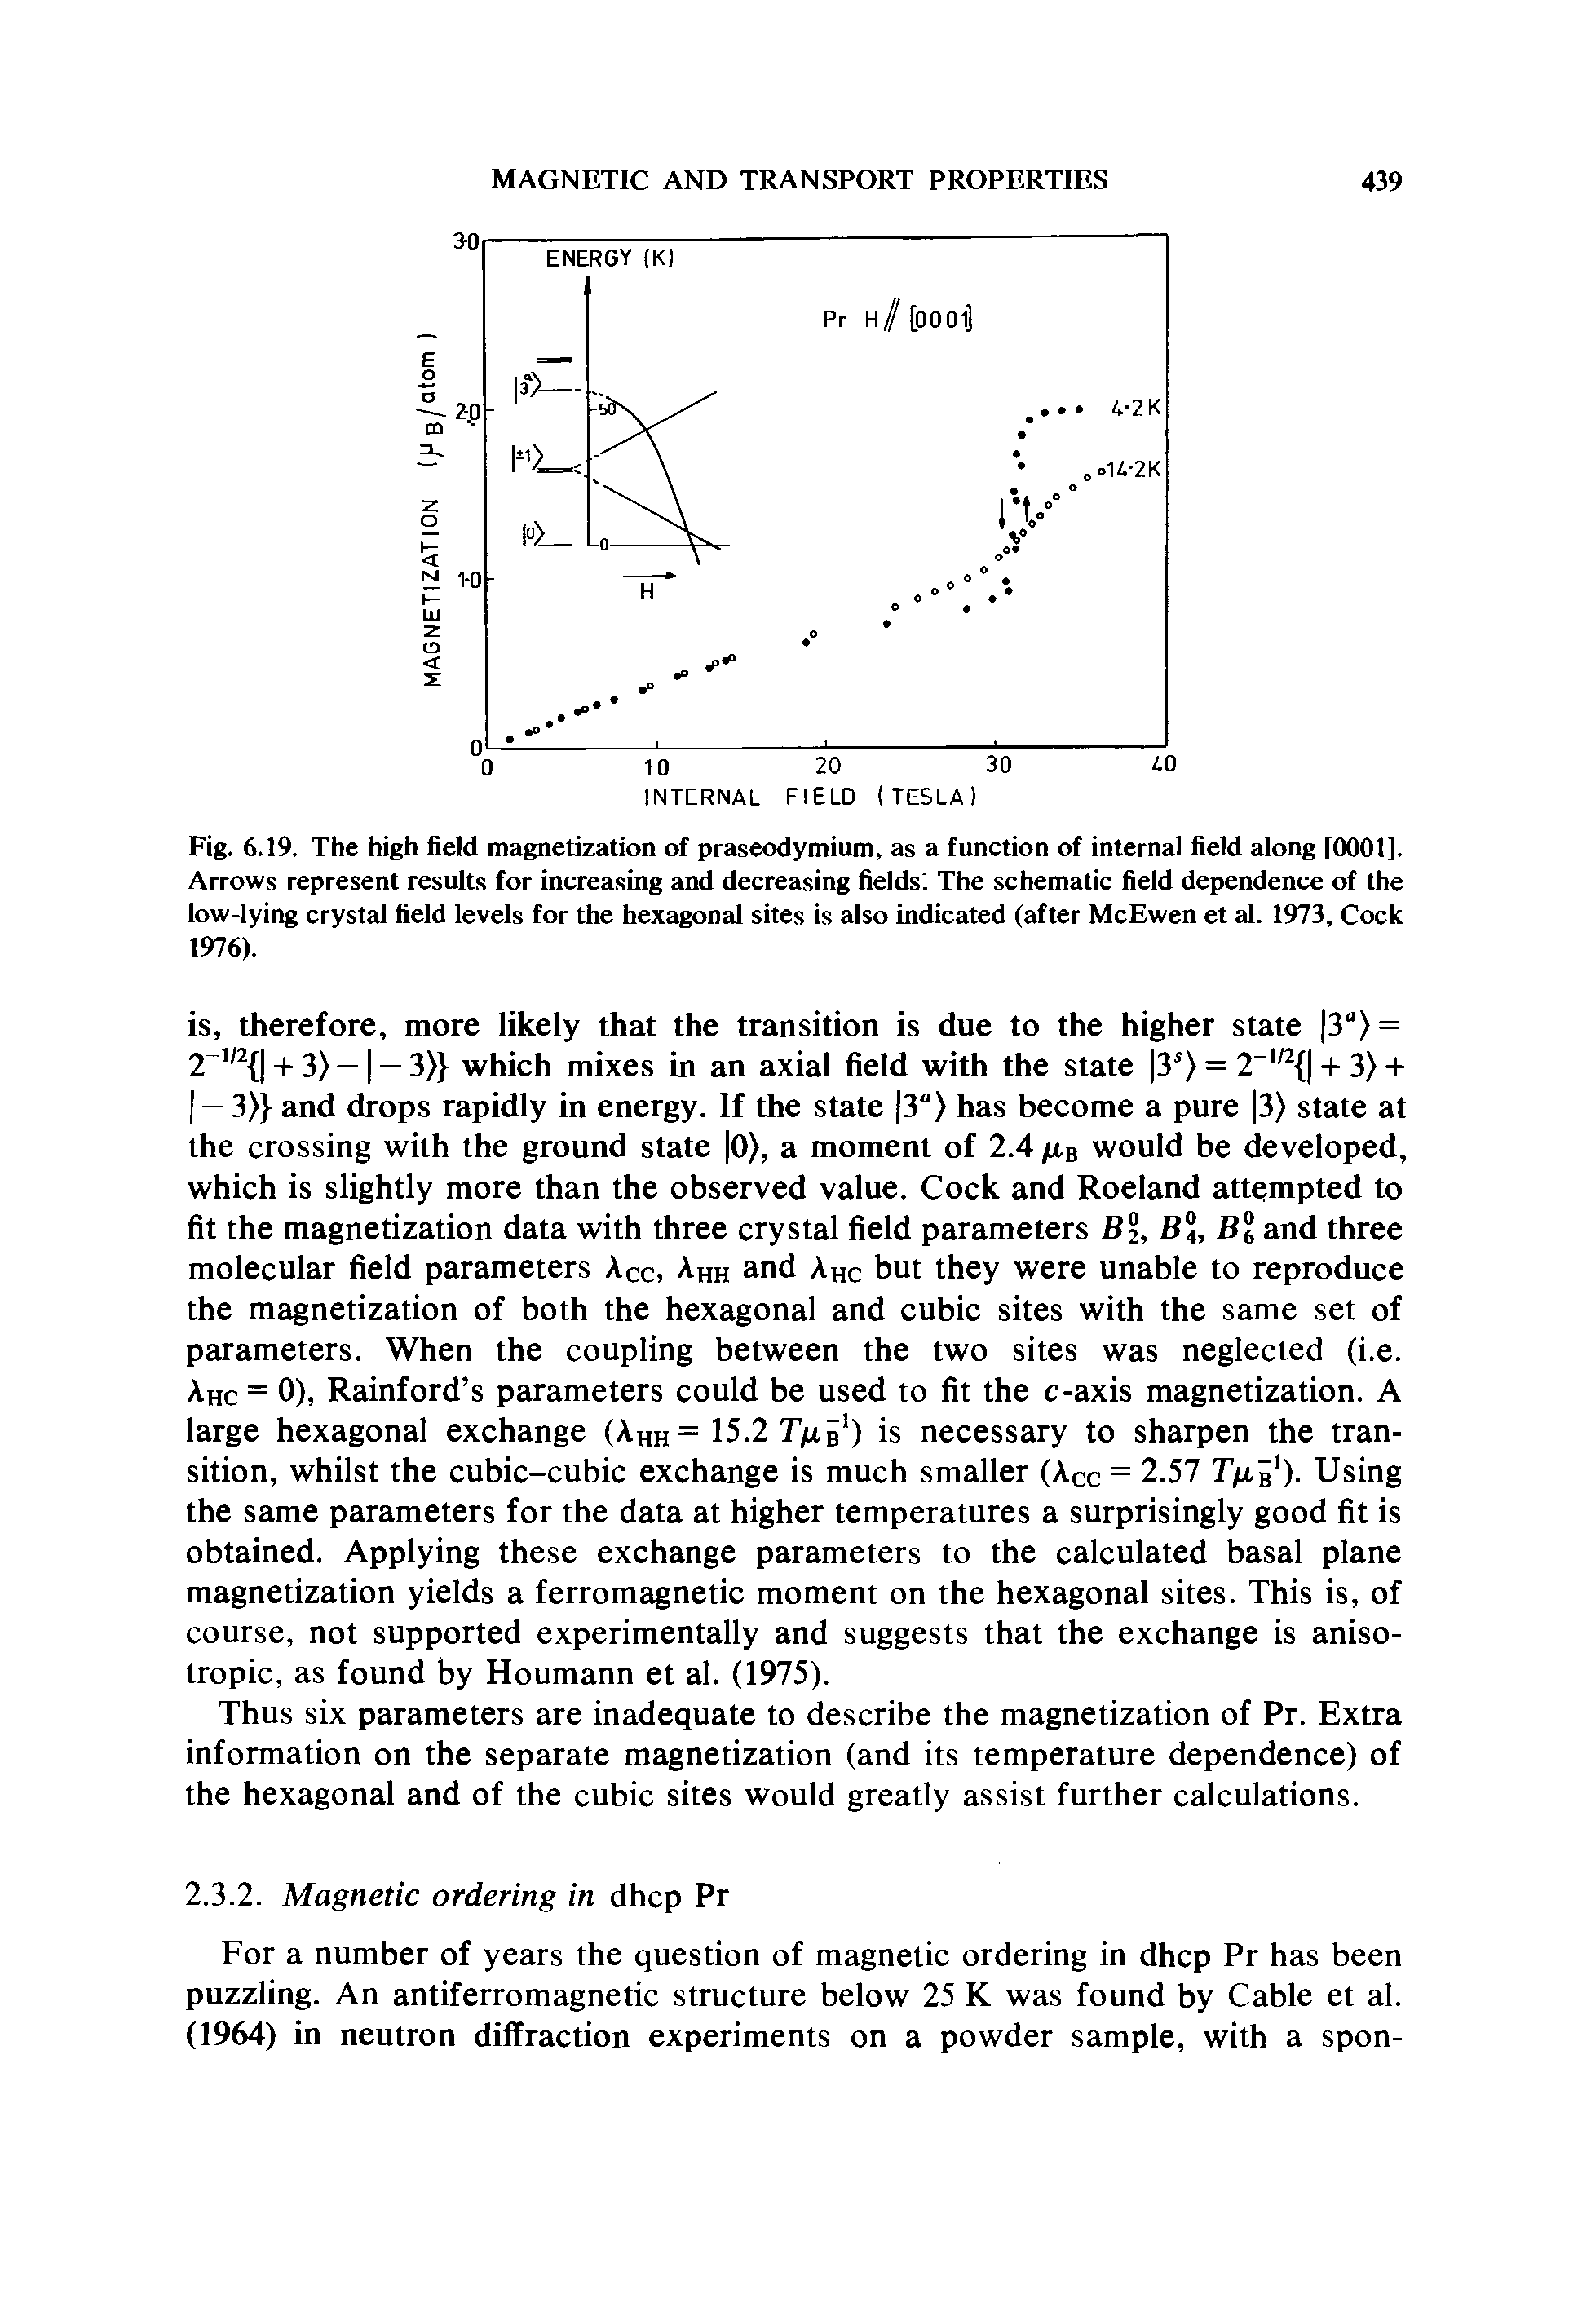 Fig. 6.19. The high field magnetization of praseodymium, as a function of internal field along [0001]. Arrows represent results for increasing and decreasing fields. The schematic field dependence of the low-lying crystal field levels for the hexagoncd sites is also indicated (after McEwen et al. 1973, Cock 1976).